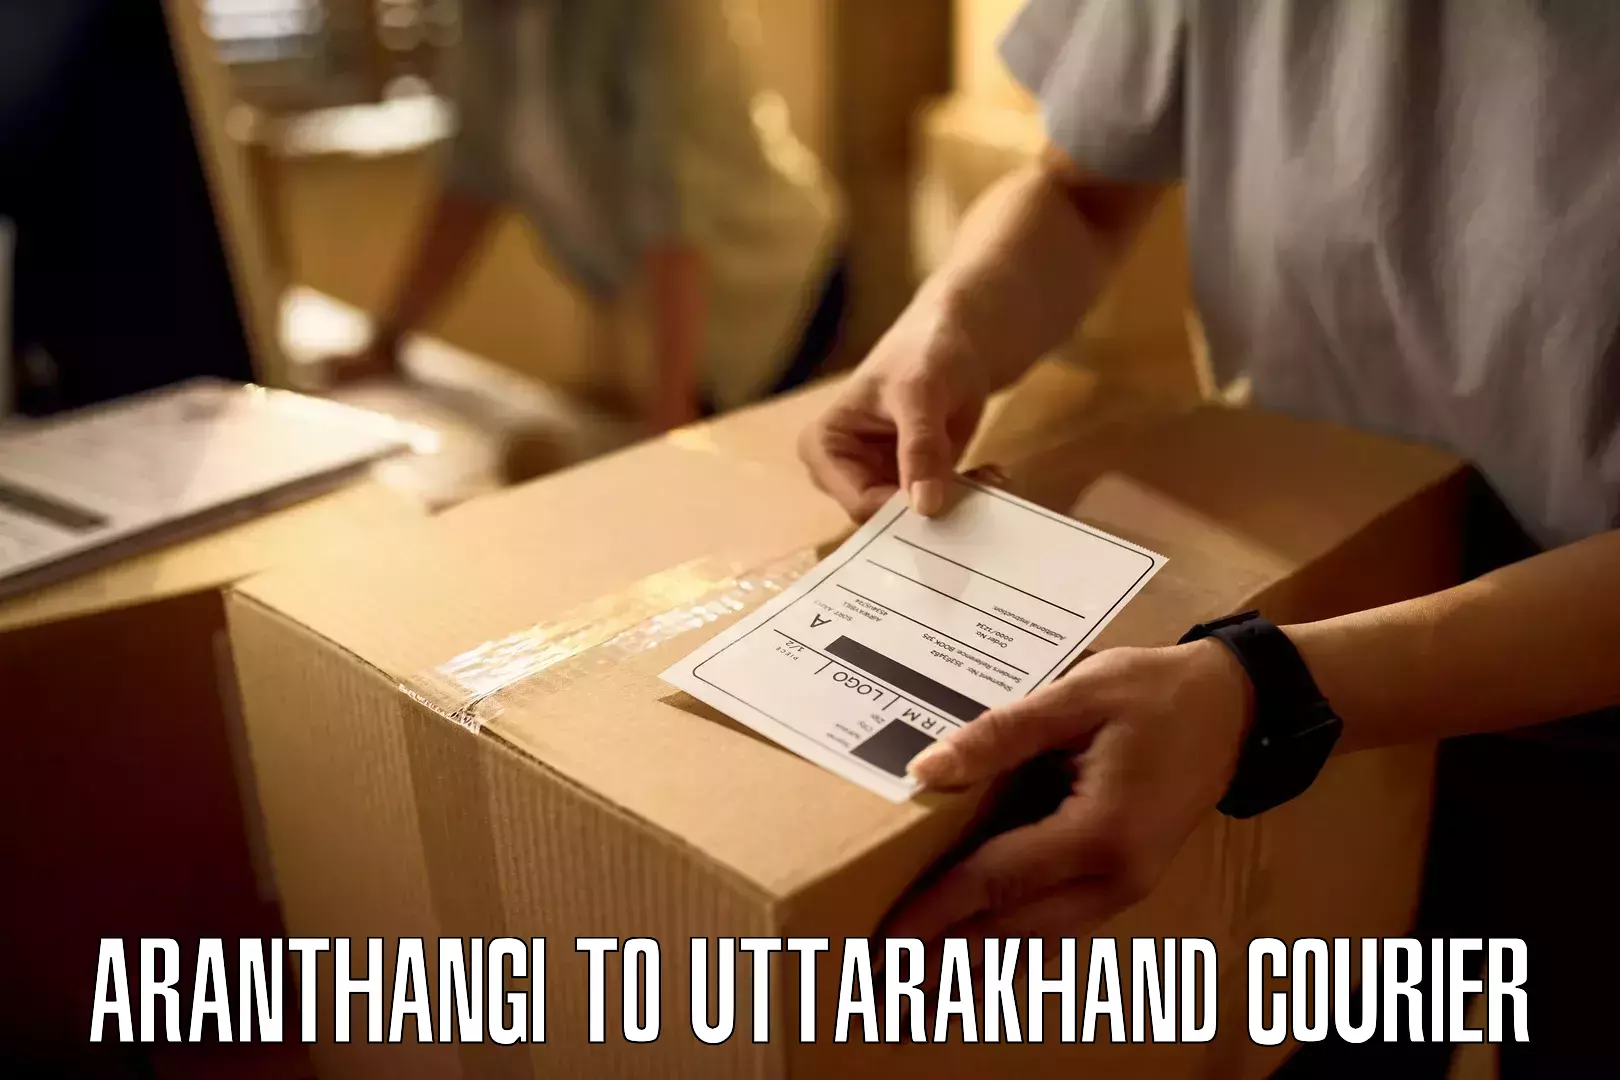 State-of-the-art courier technology Aranthangi to Joshimath